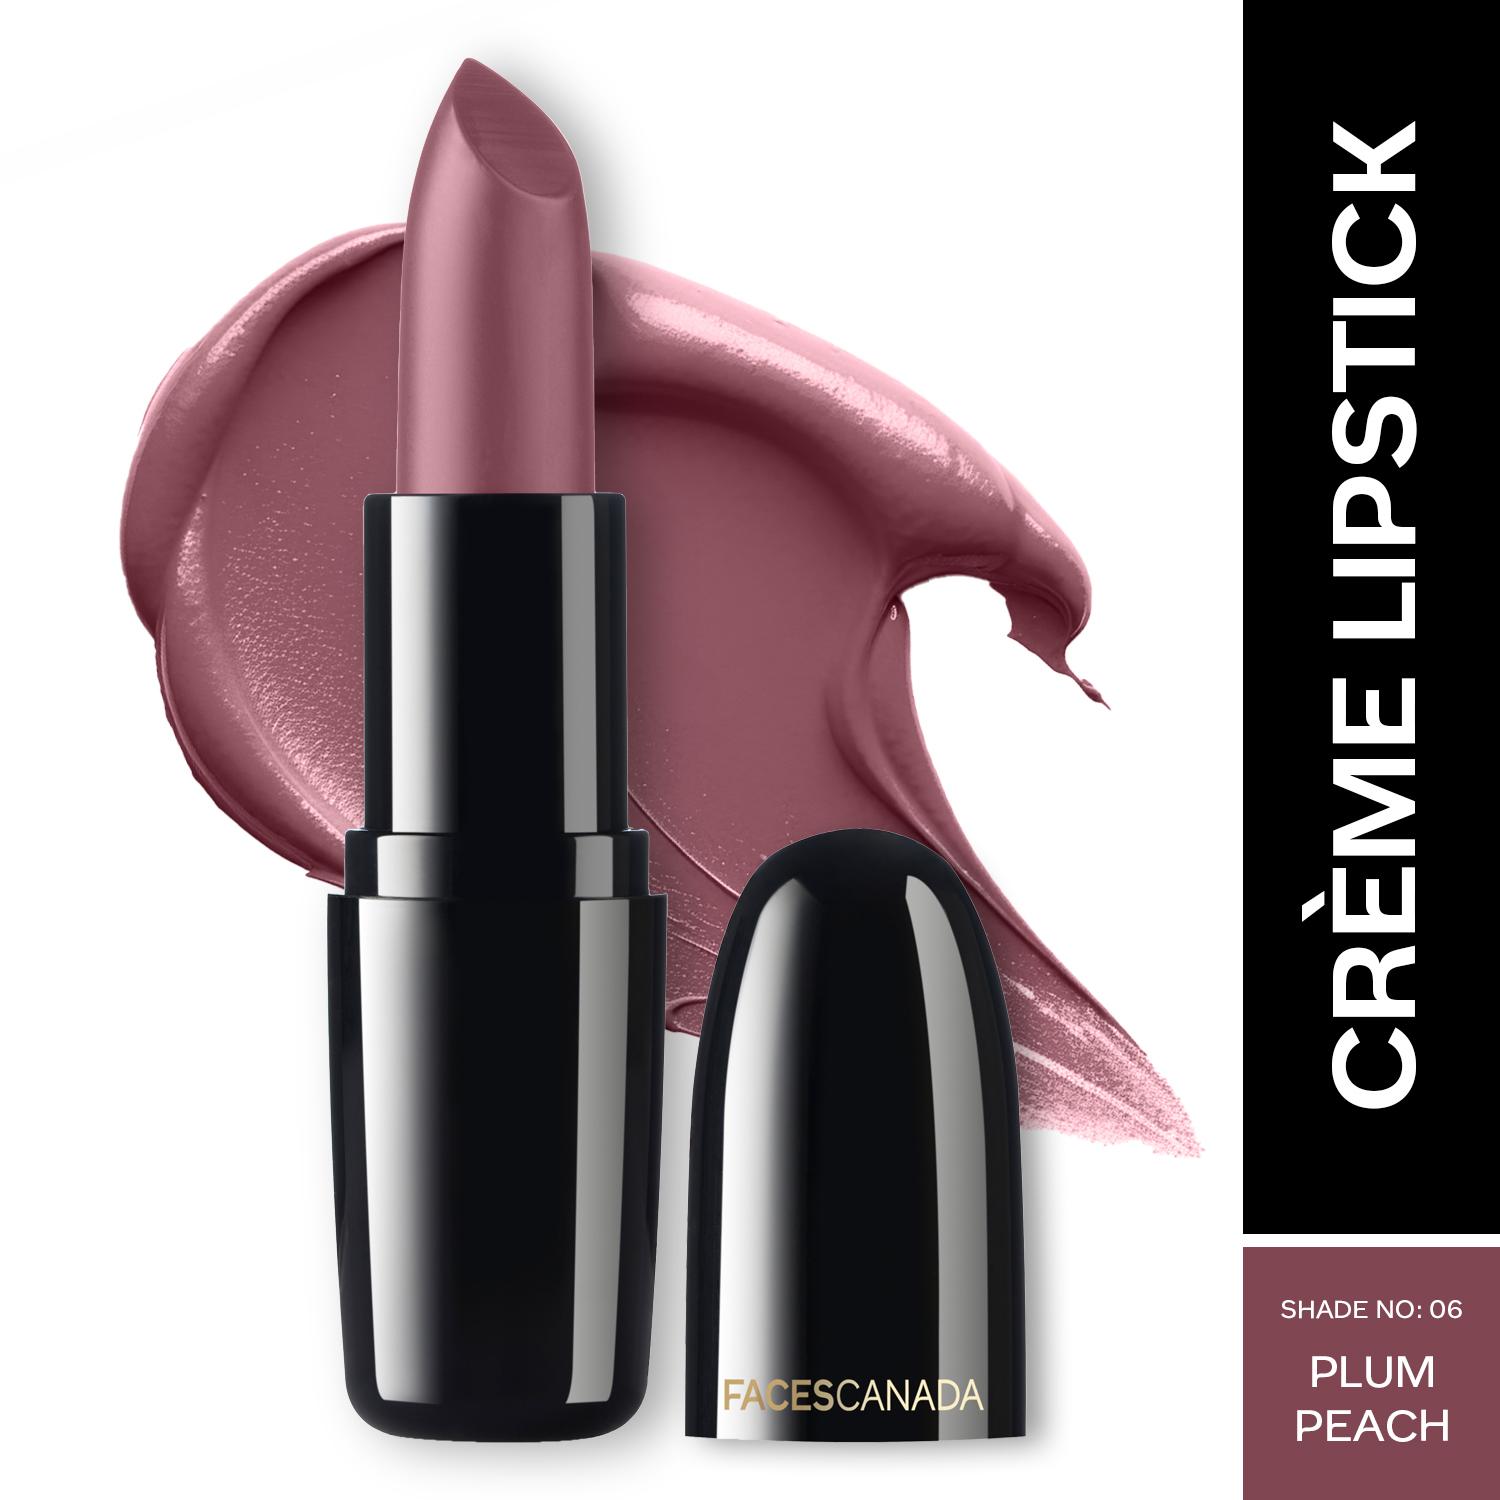 Faces Canada | Faces Canada Weightless Creme Finish Lipstick, Creamy Finish, Hydrated Lips - Plum Peach 06 (4 g)